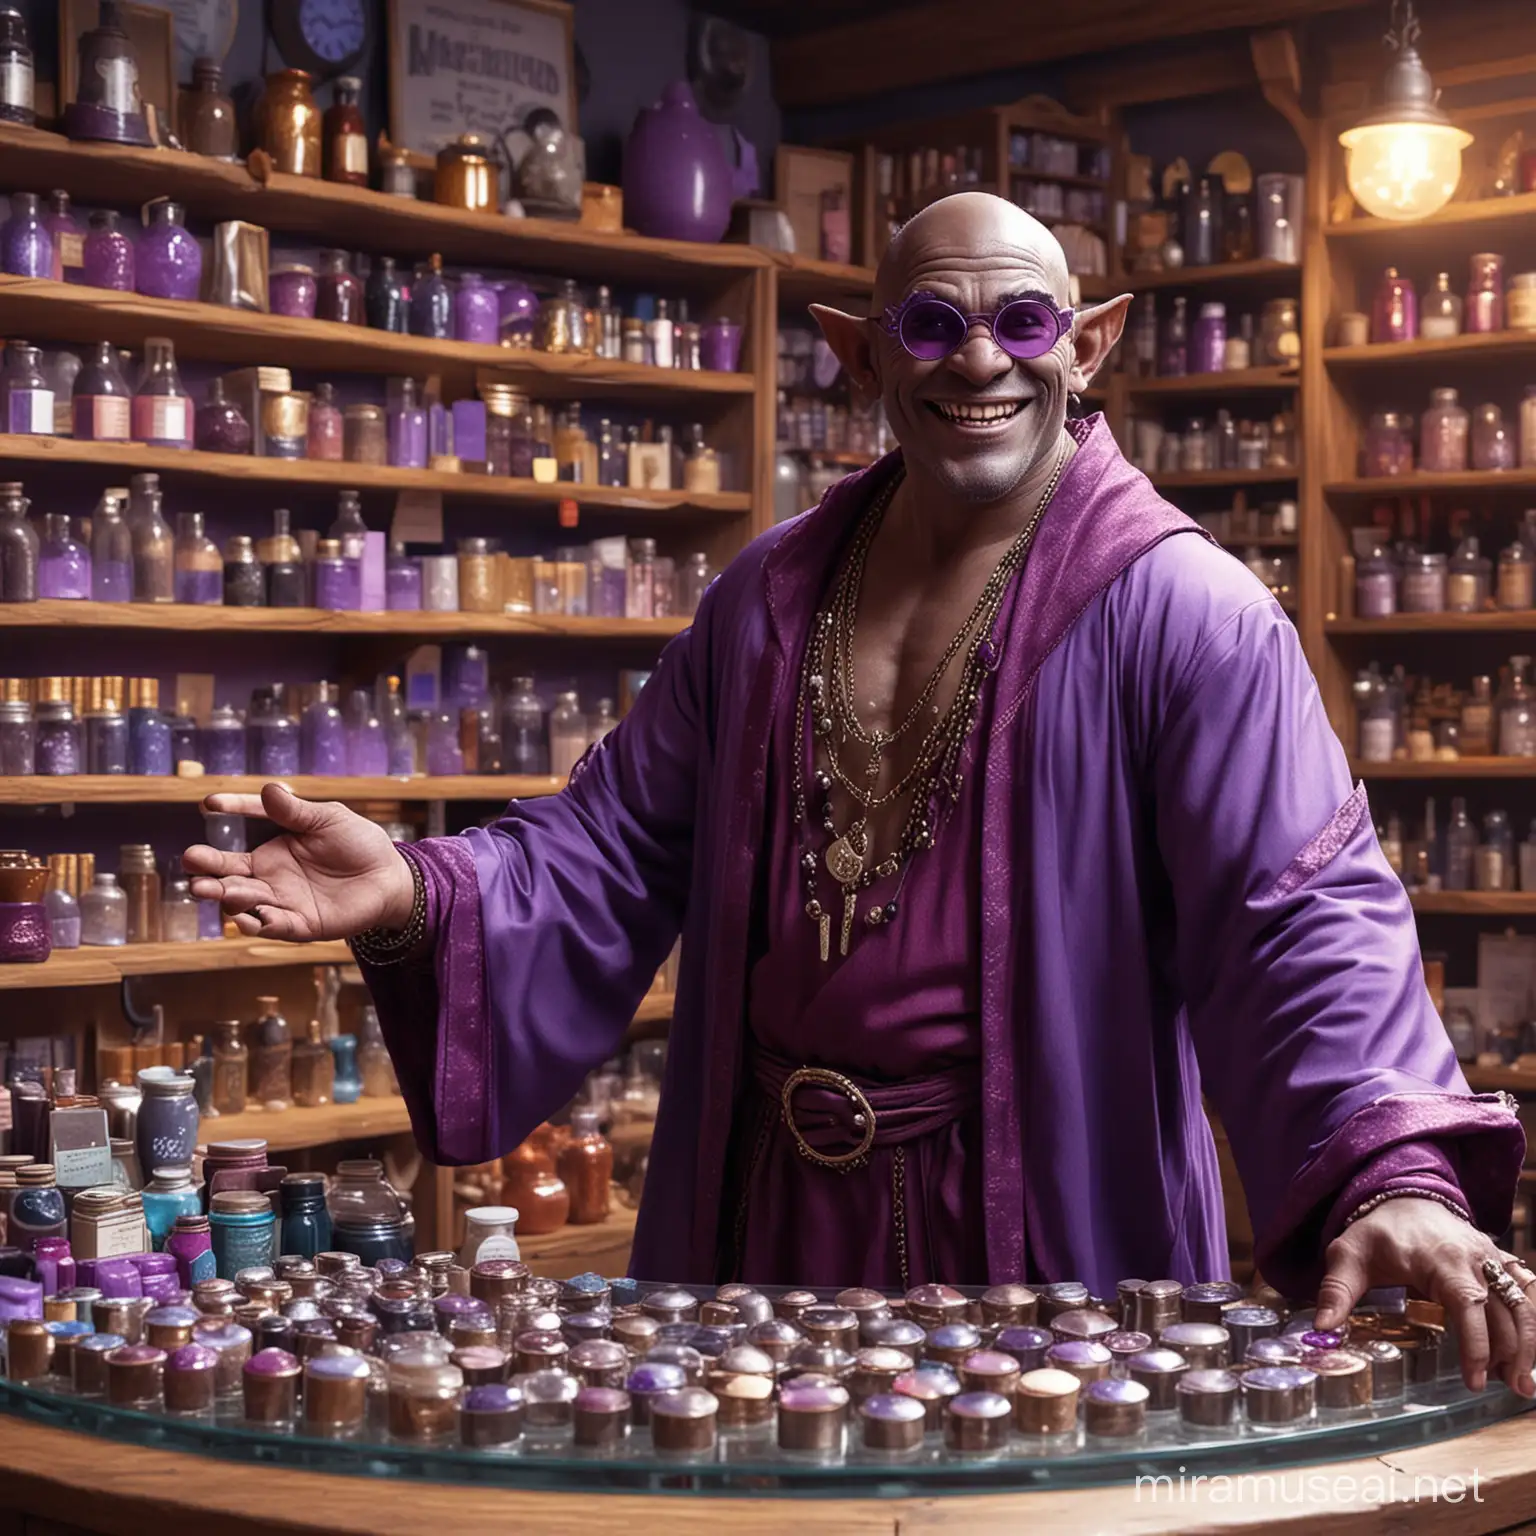 Male Orc shopkeeper , flamboyant, purple robes, extranvagant, round sunglasses, dancing, smiling, shopkeeper of a magic store, holograms on counter of various magic items.